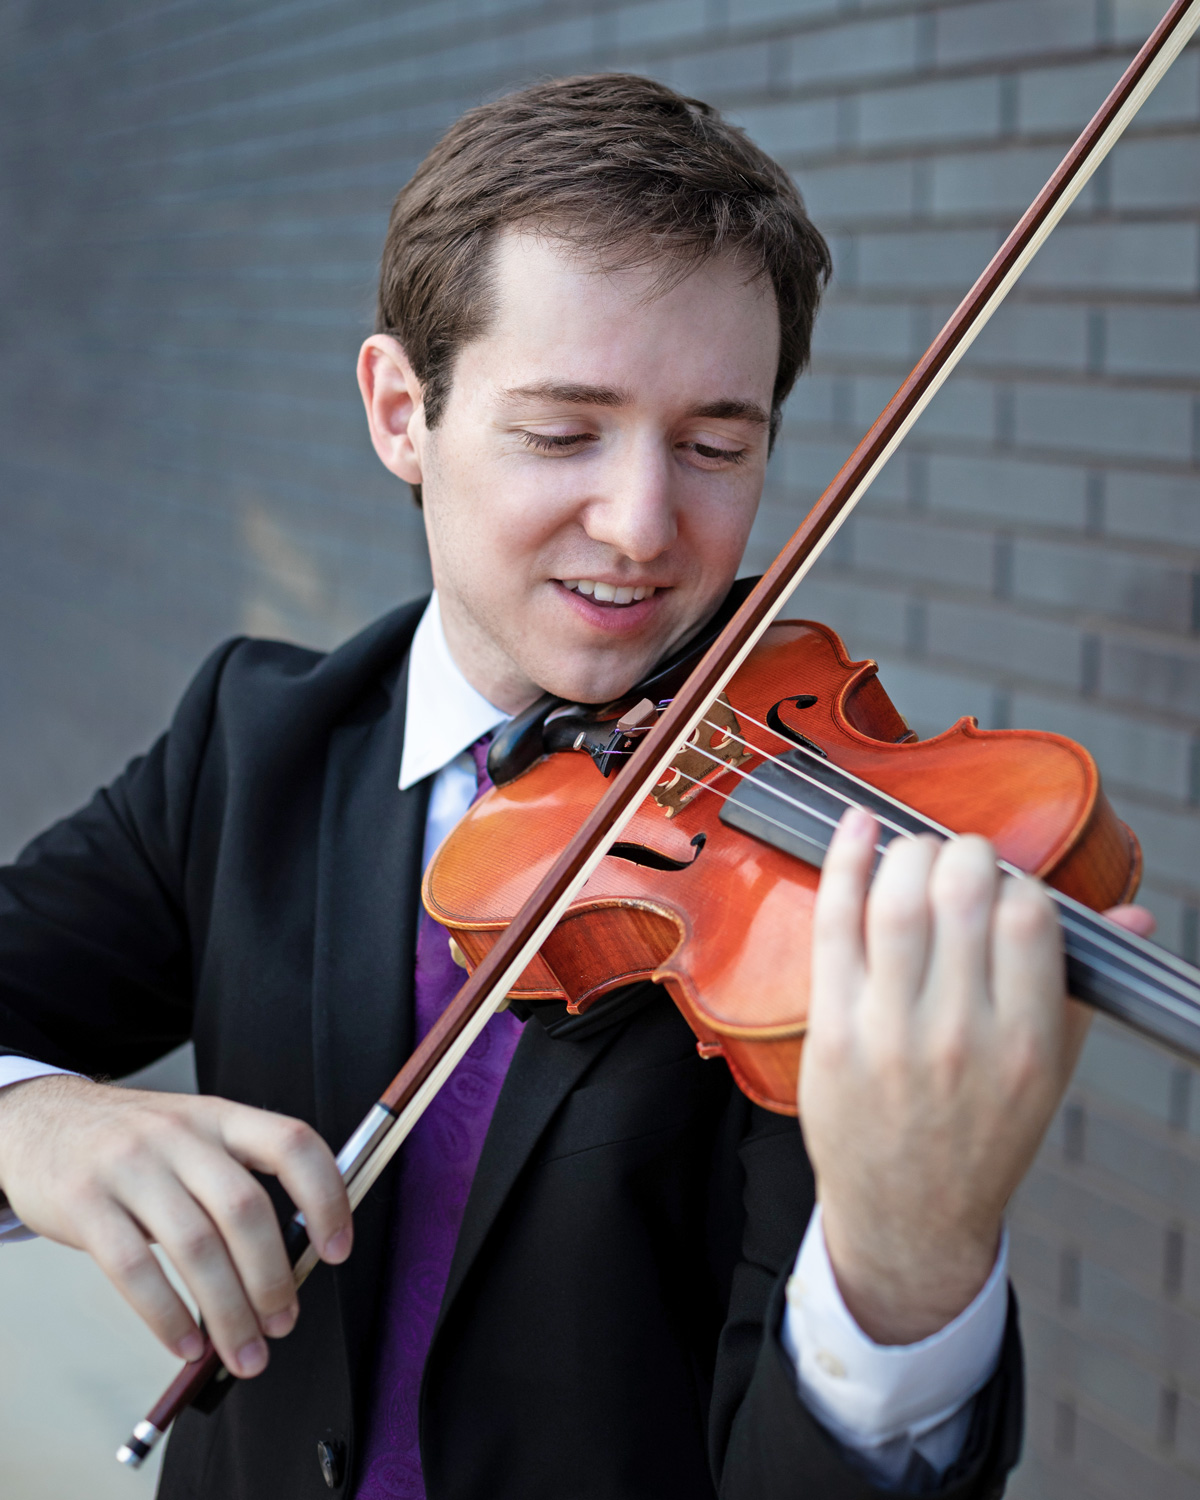 a young smiling man plays violin. he is wearing a suit and a purple tie.